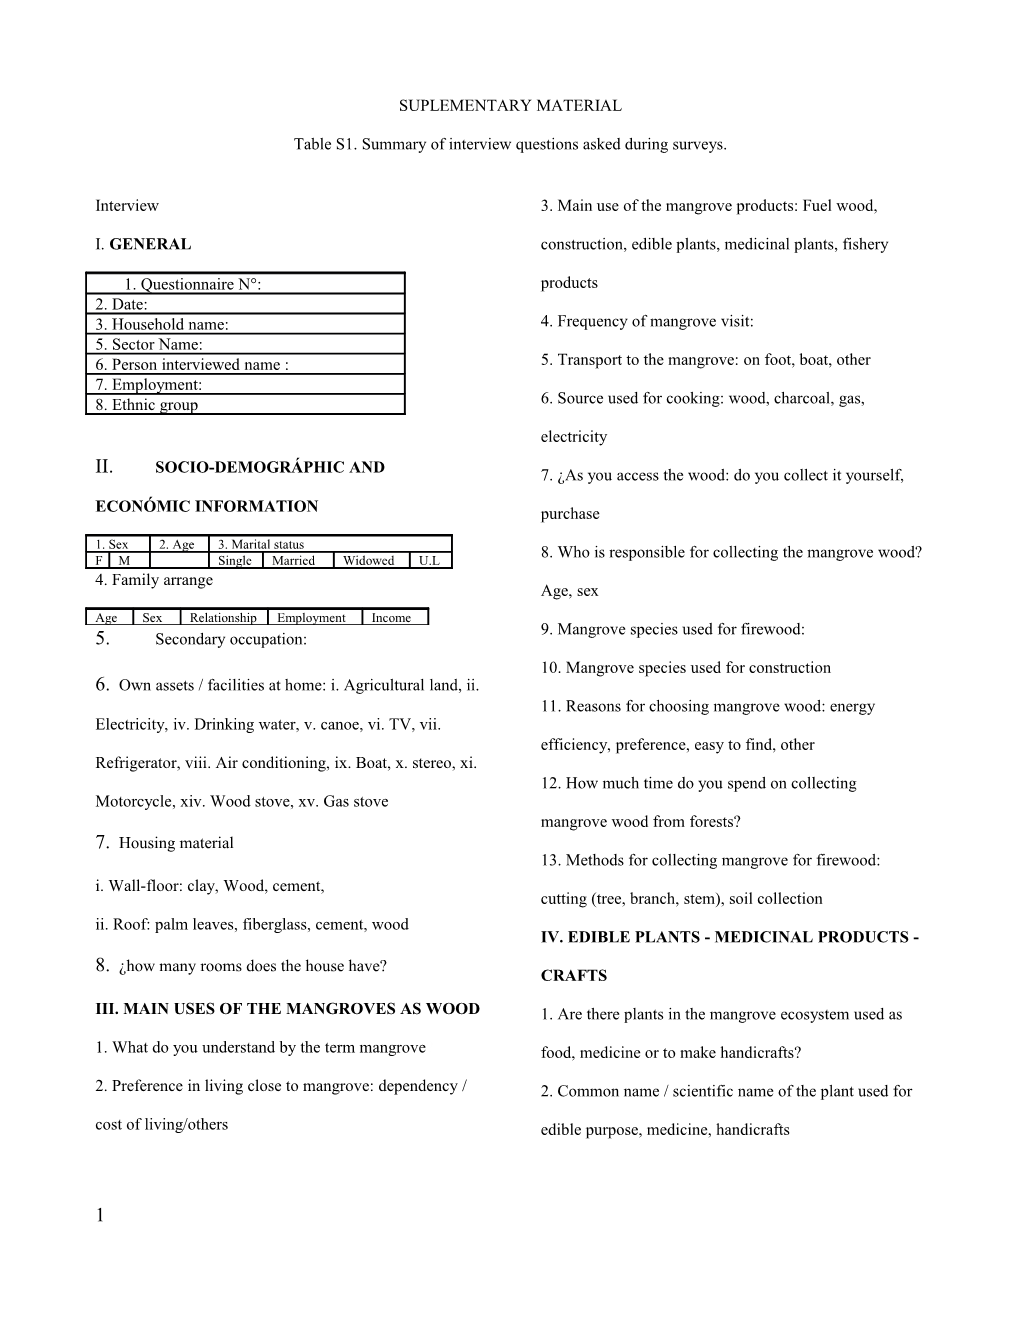 Table S1. Summary of Interview Questions Asked During Surveys